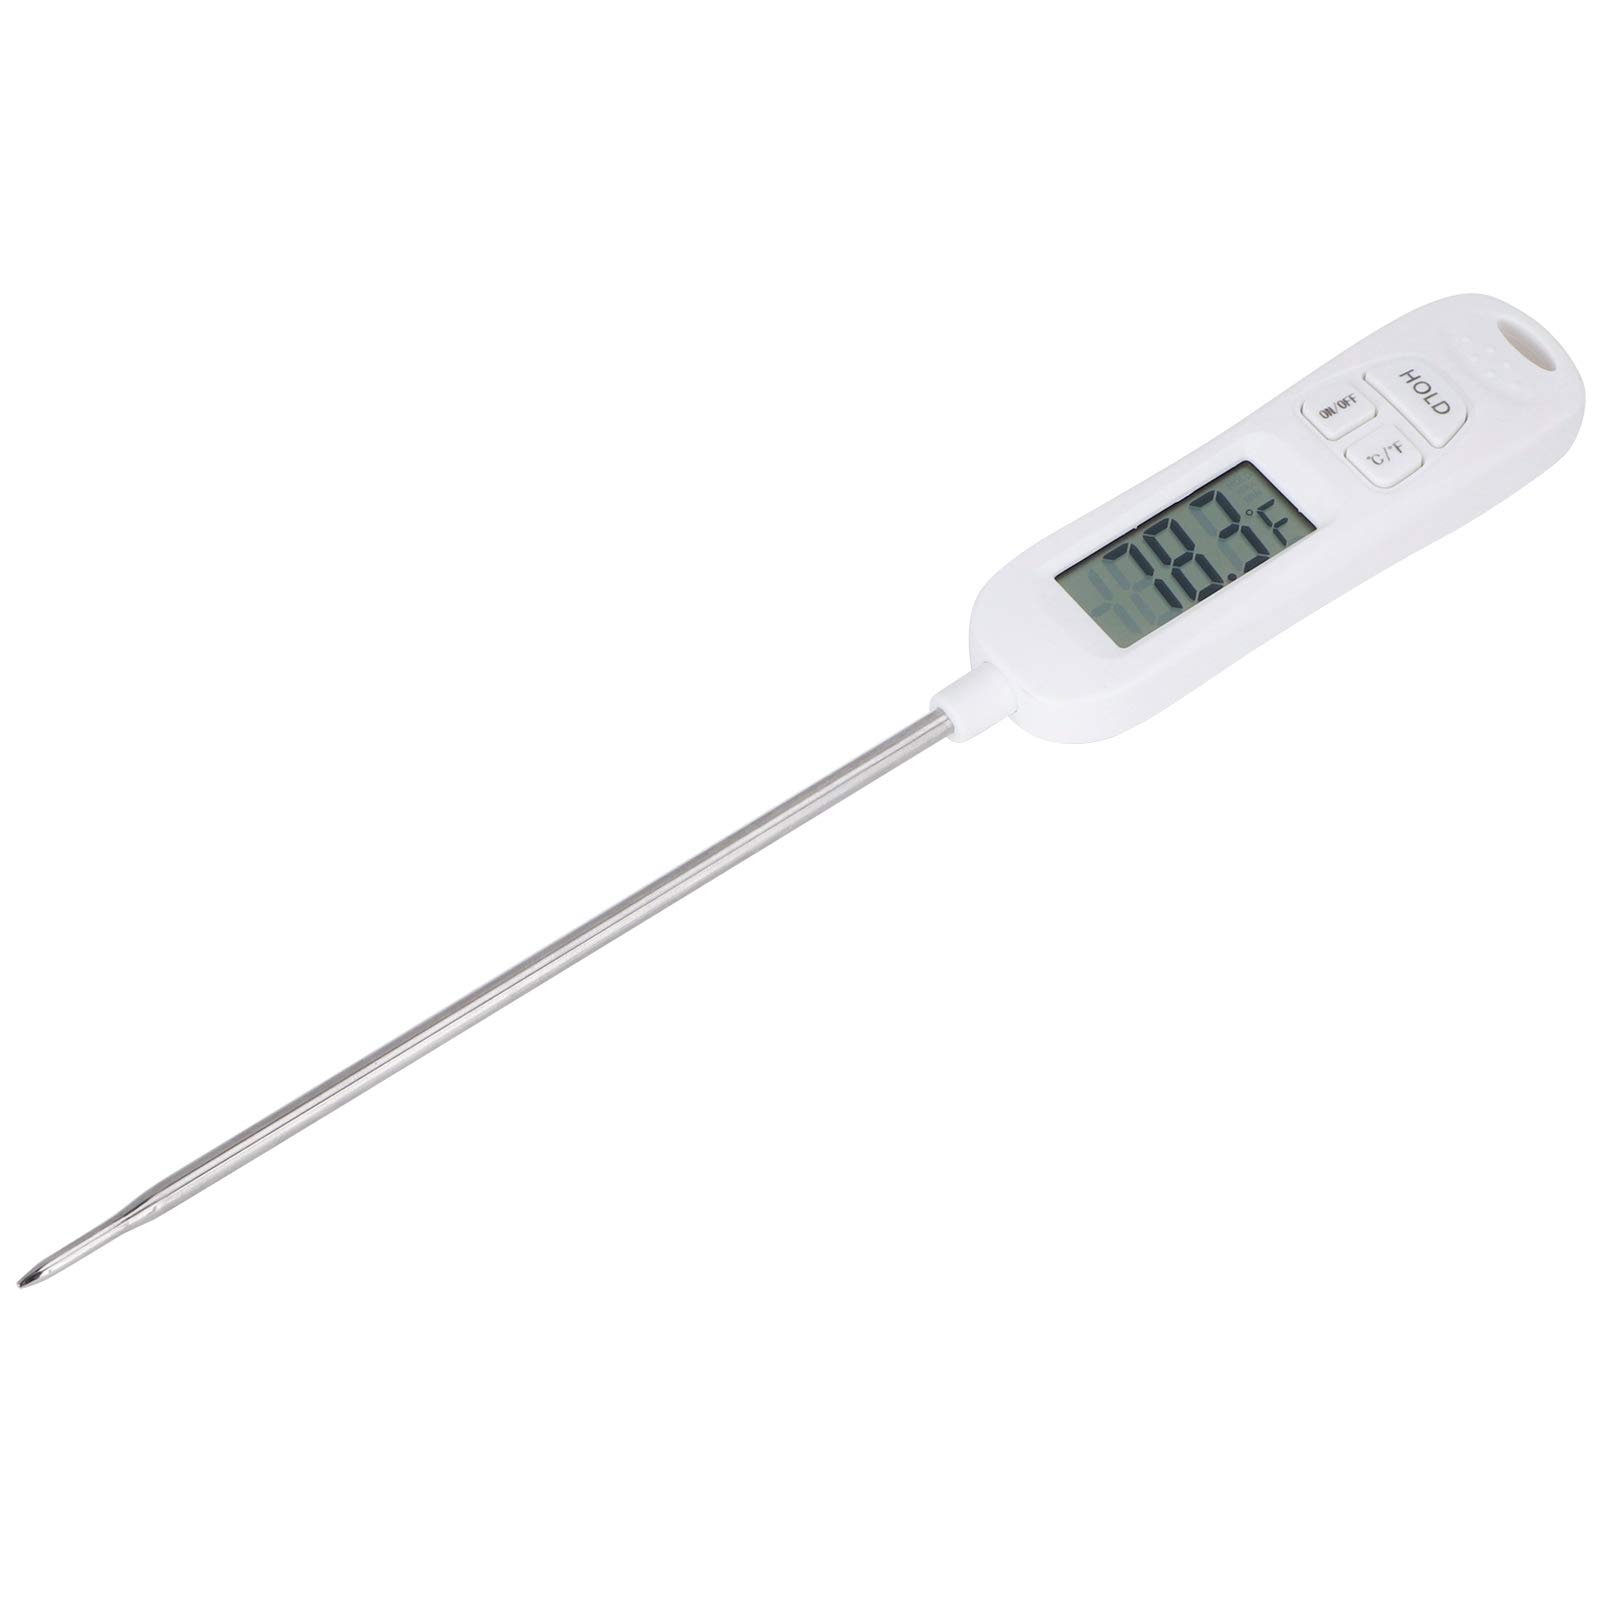 Thermometer displaying high temperature